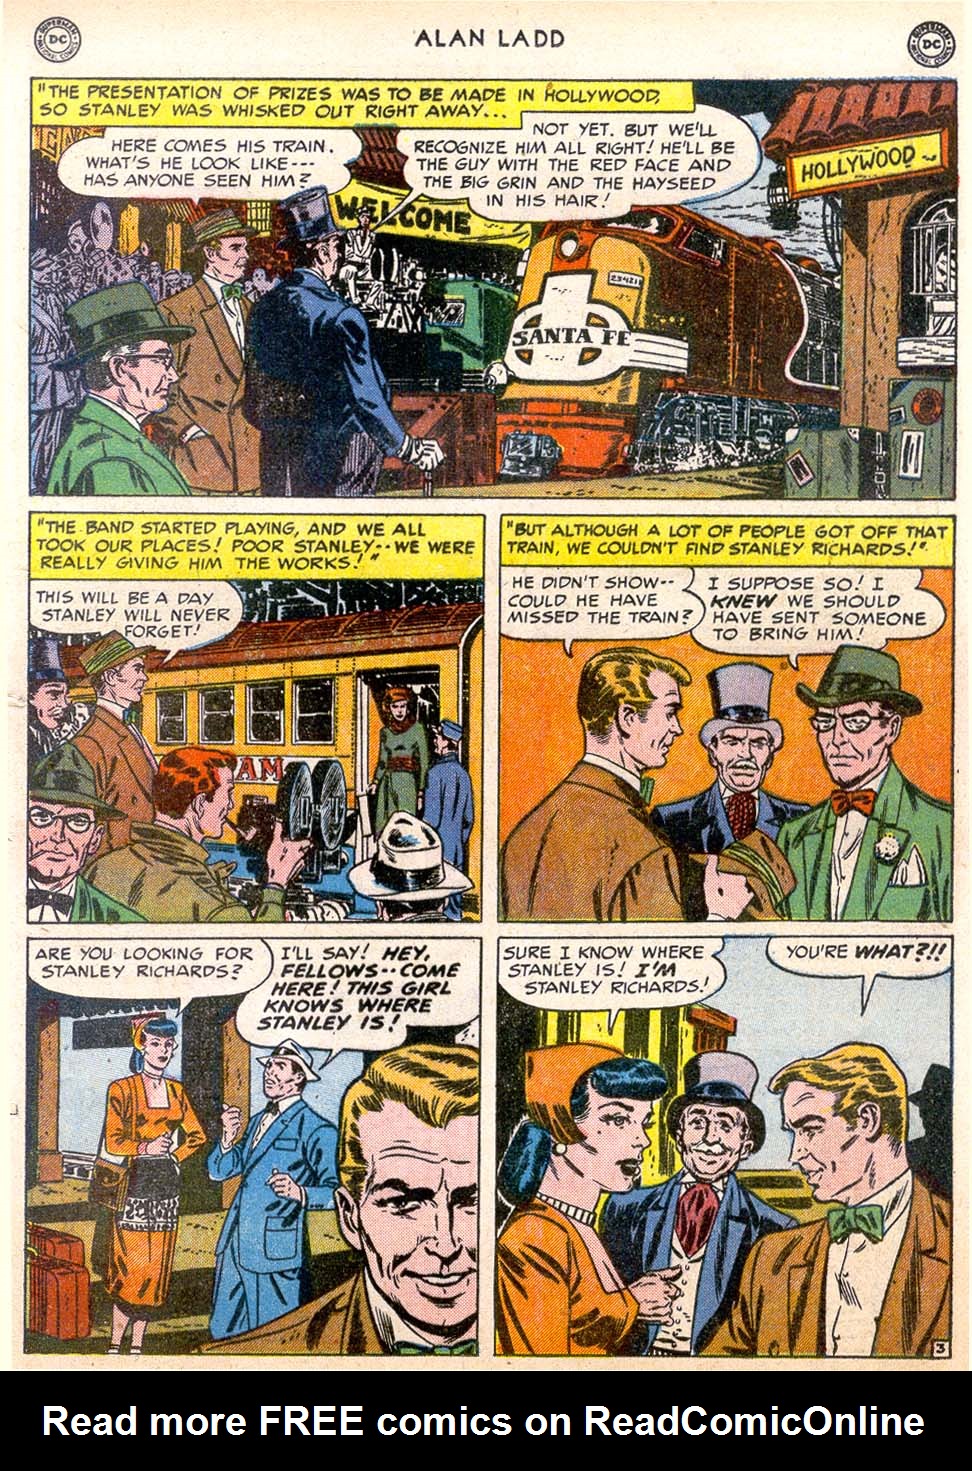 Read online Adventures of Alan Ladd comic -  Issue #4 - 19